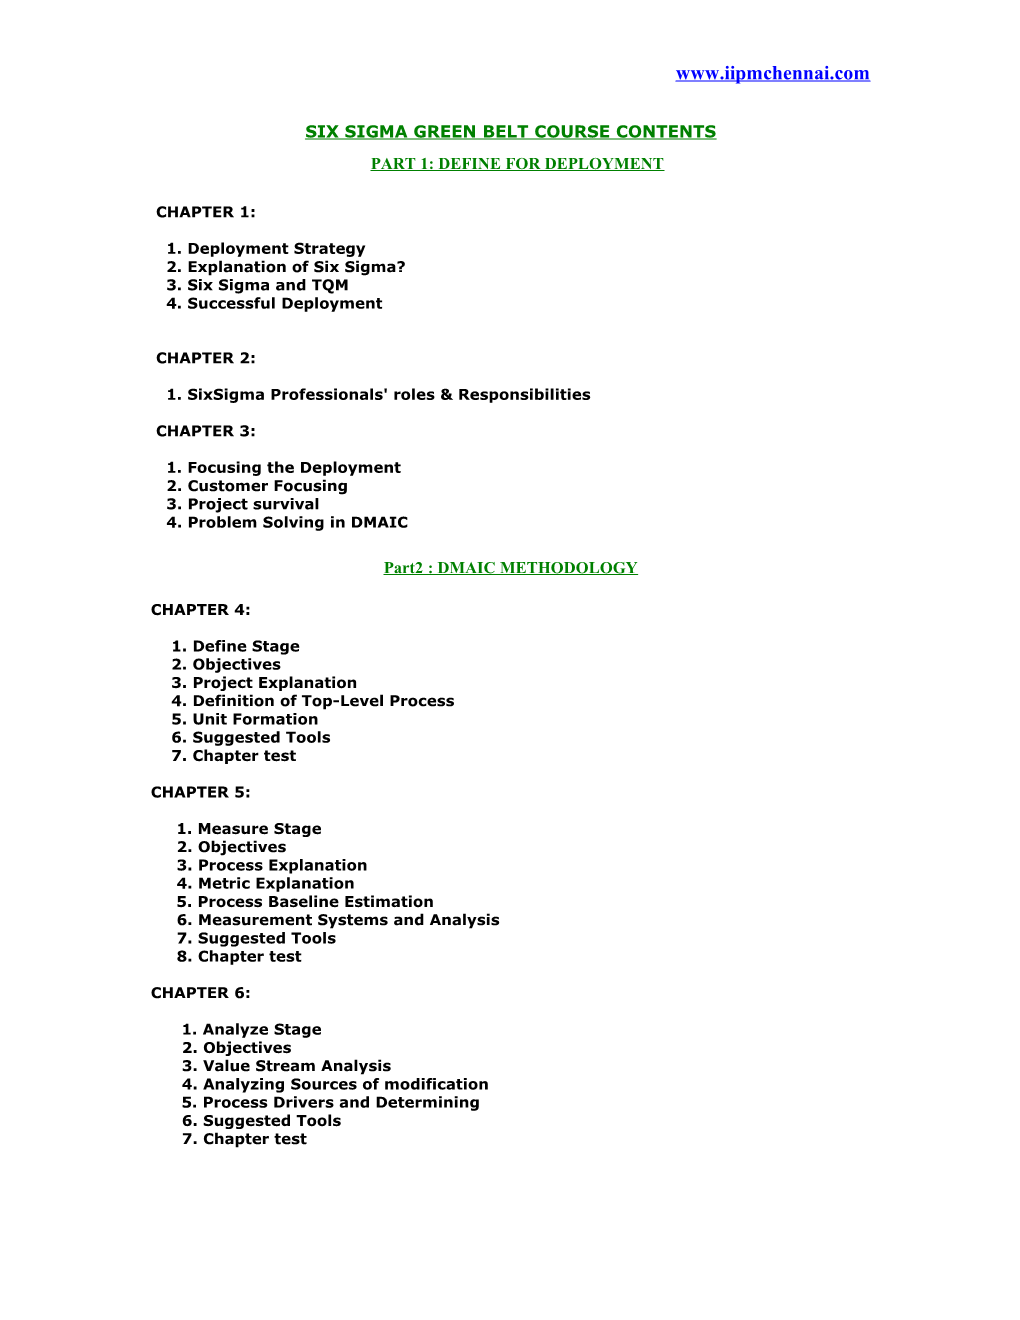 Six Sigma Green Belt Course Contents